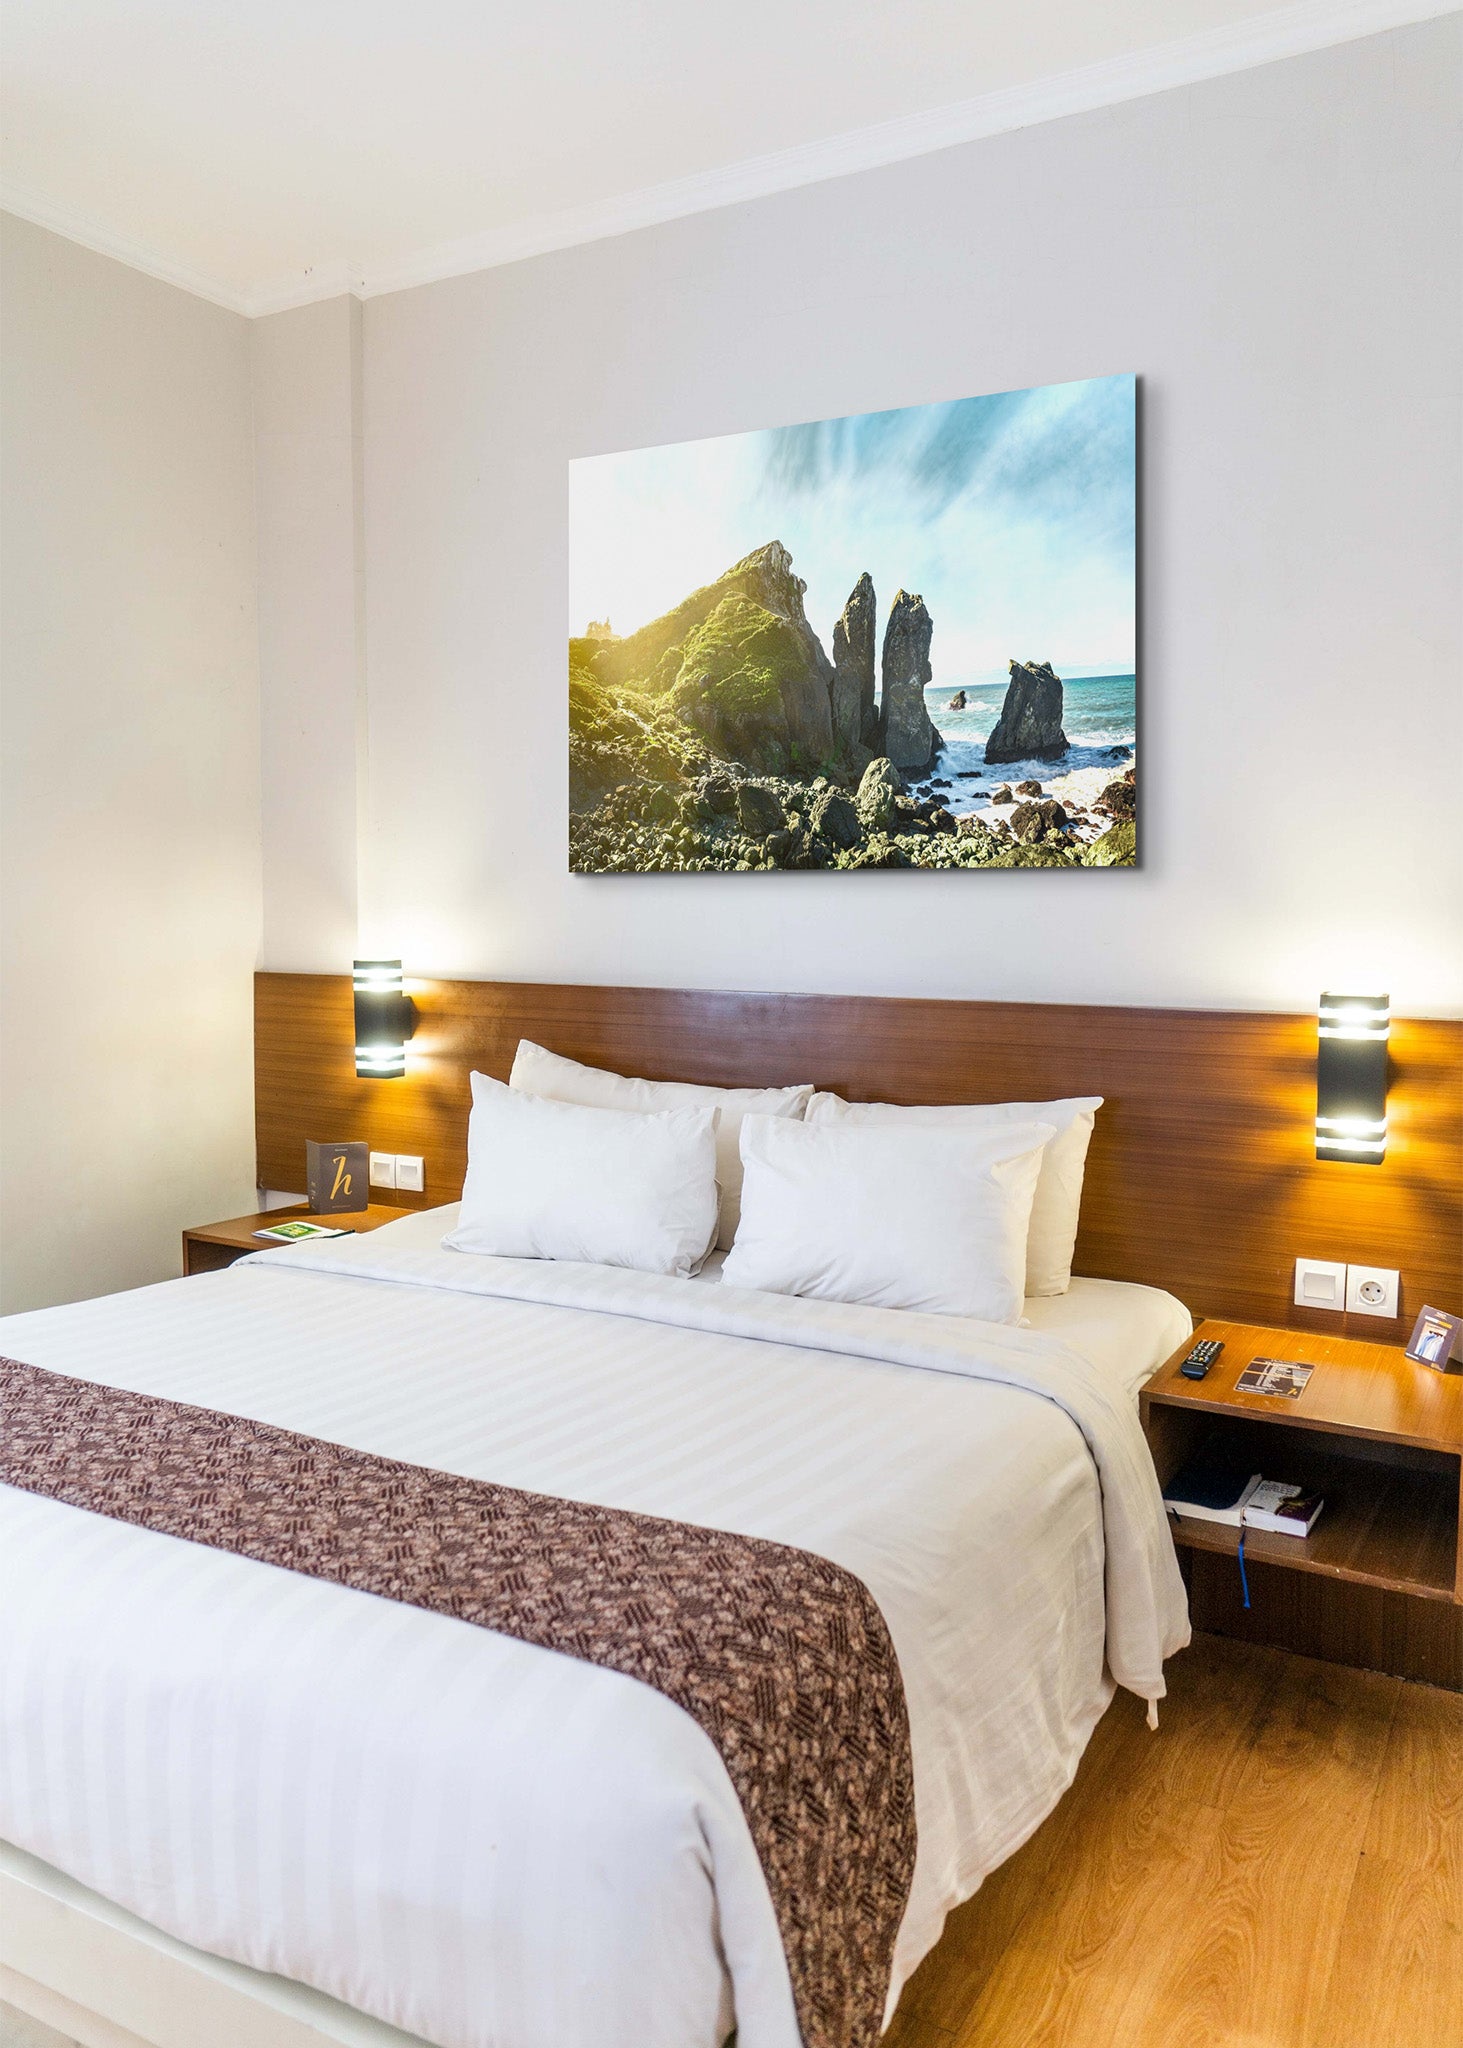 Picture hanging on the wall of a hotel room over a bed. The picture is a fine art landscape photograph titled "Sue-Meg" by Cameron Dreaux of Dreaux Fine Art.